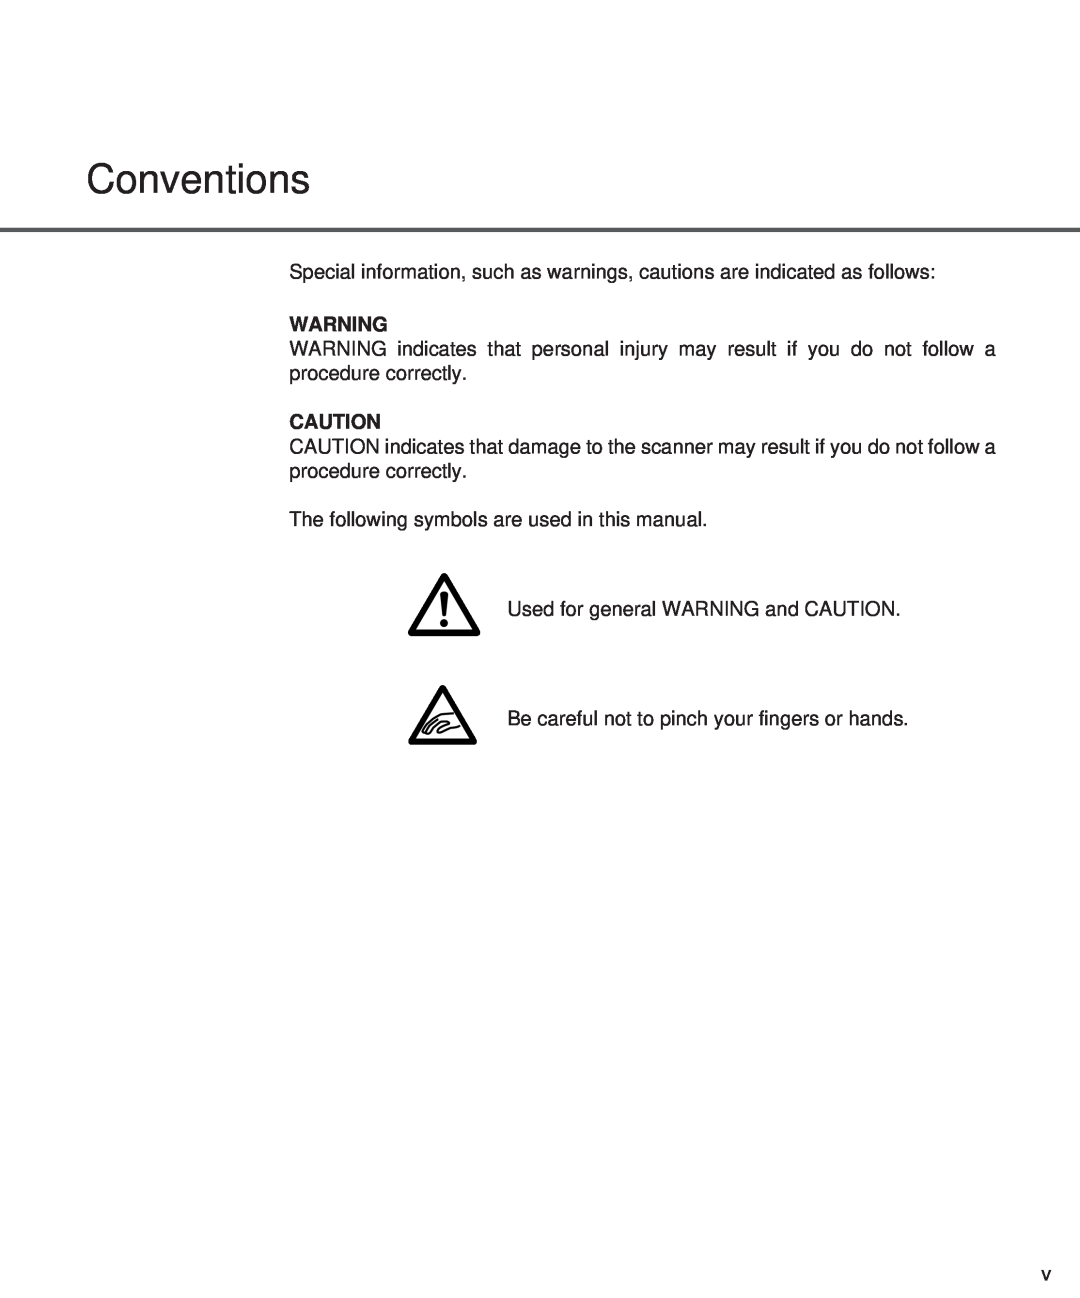 Fujitsu M3097DE, M3097DG Conventions, The following symbols are used in this manual, Used for general WARNING and CAUTION 